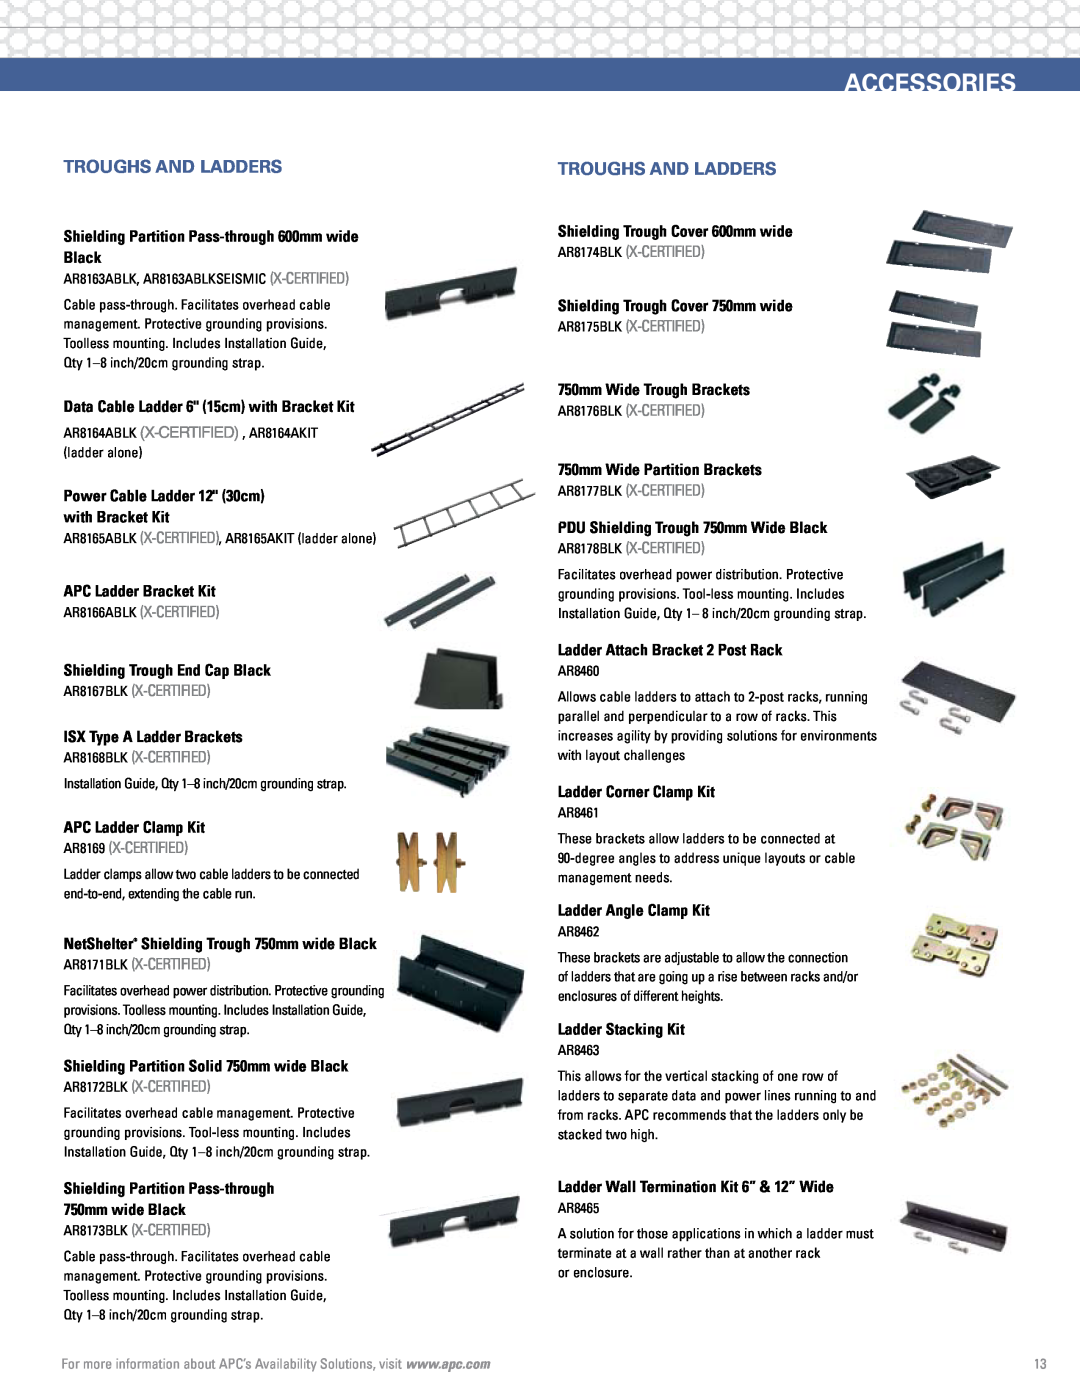 APC Rack Systems manual Accessories, troughs and ladders, Shielding Partition Pass-through600mm wide Black 